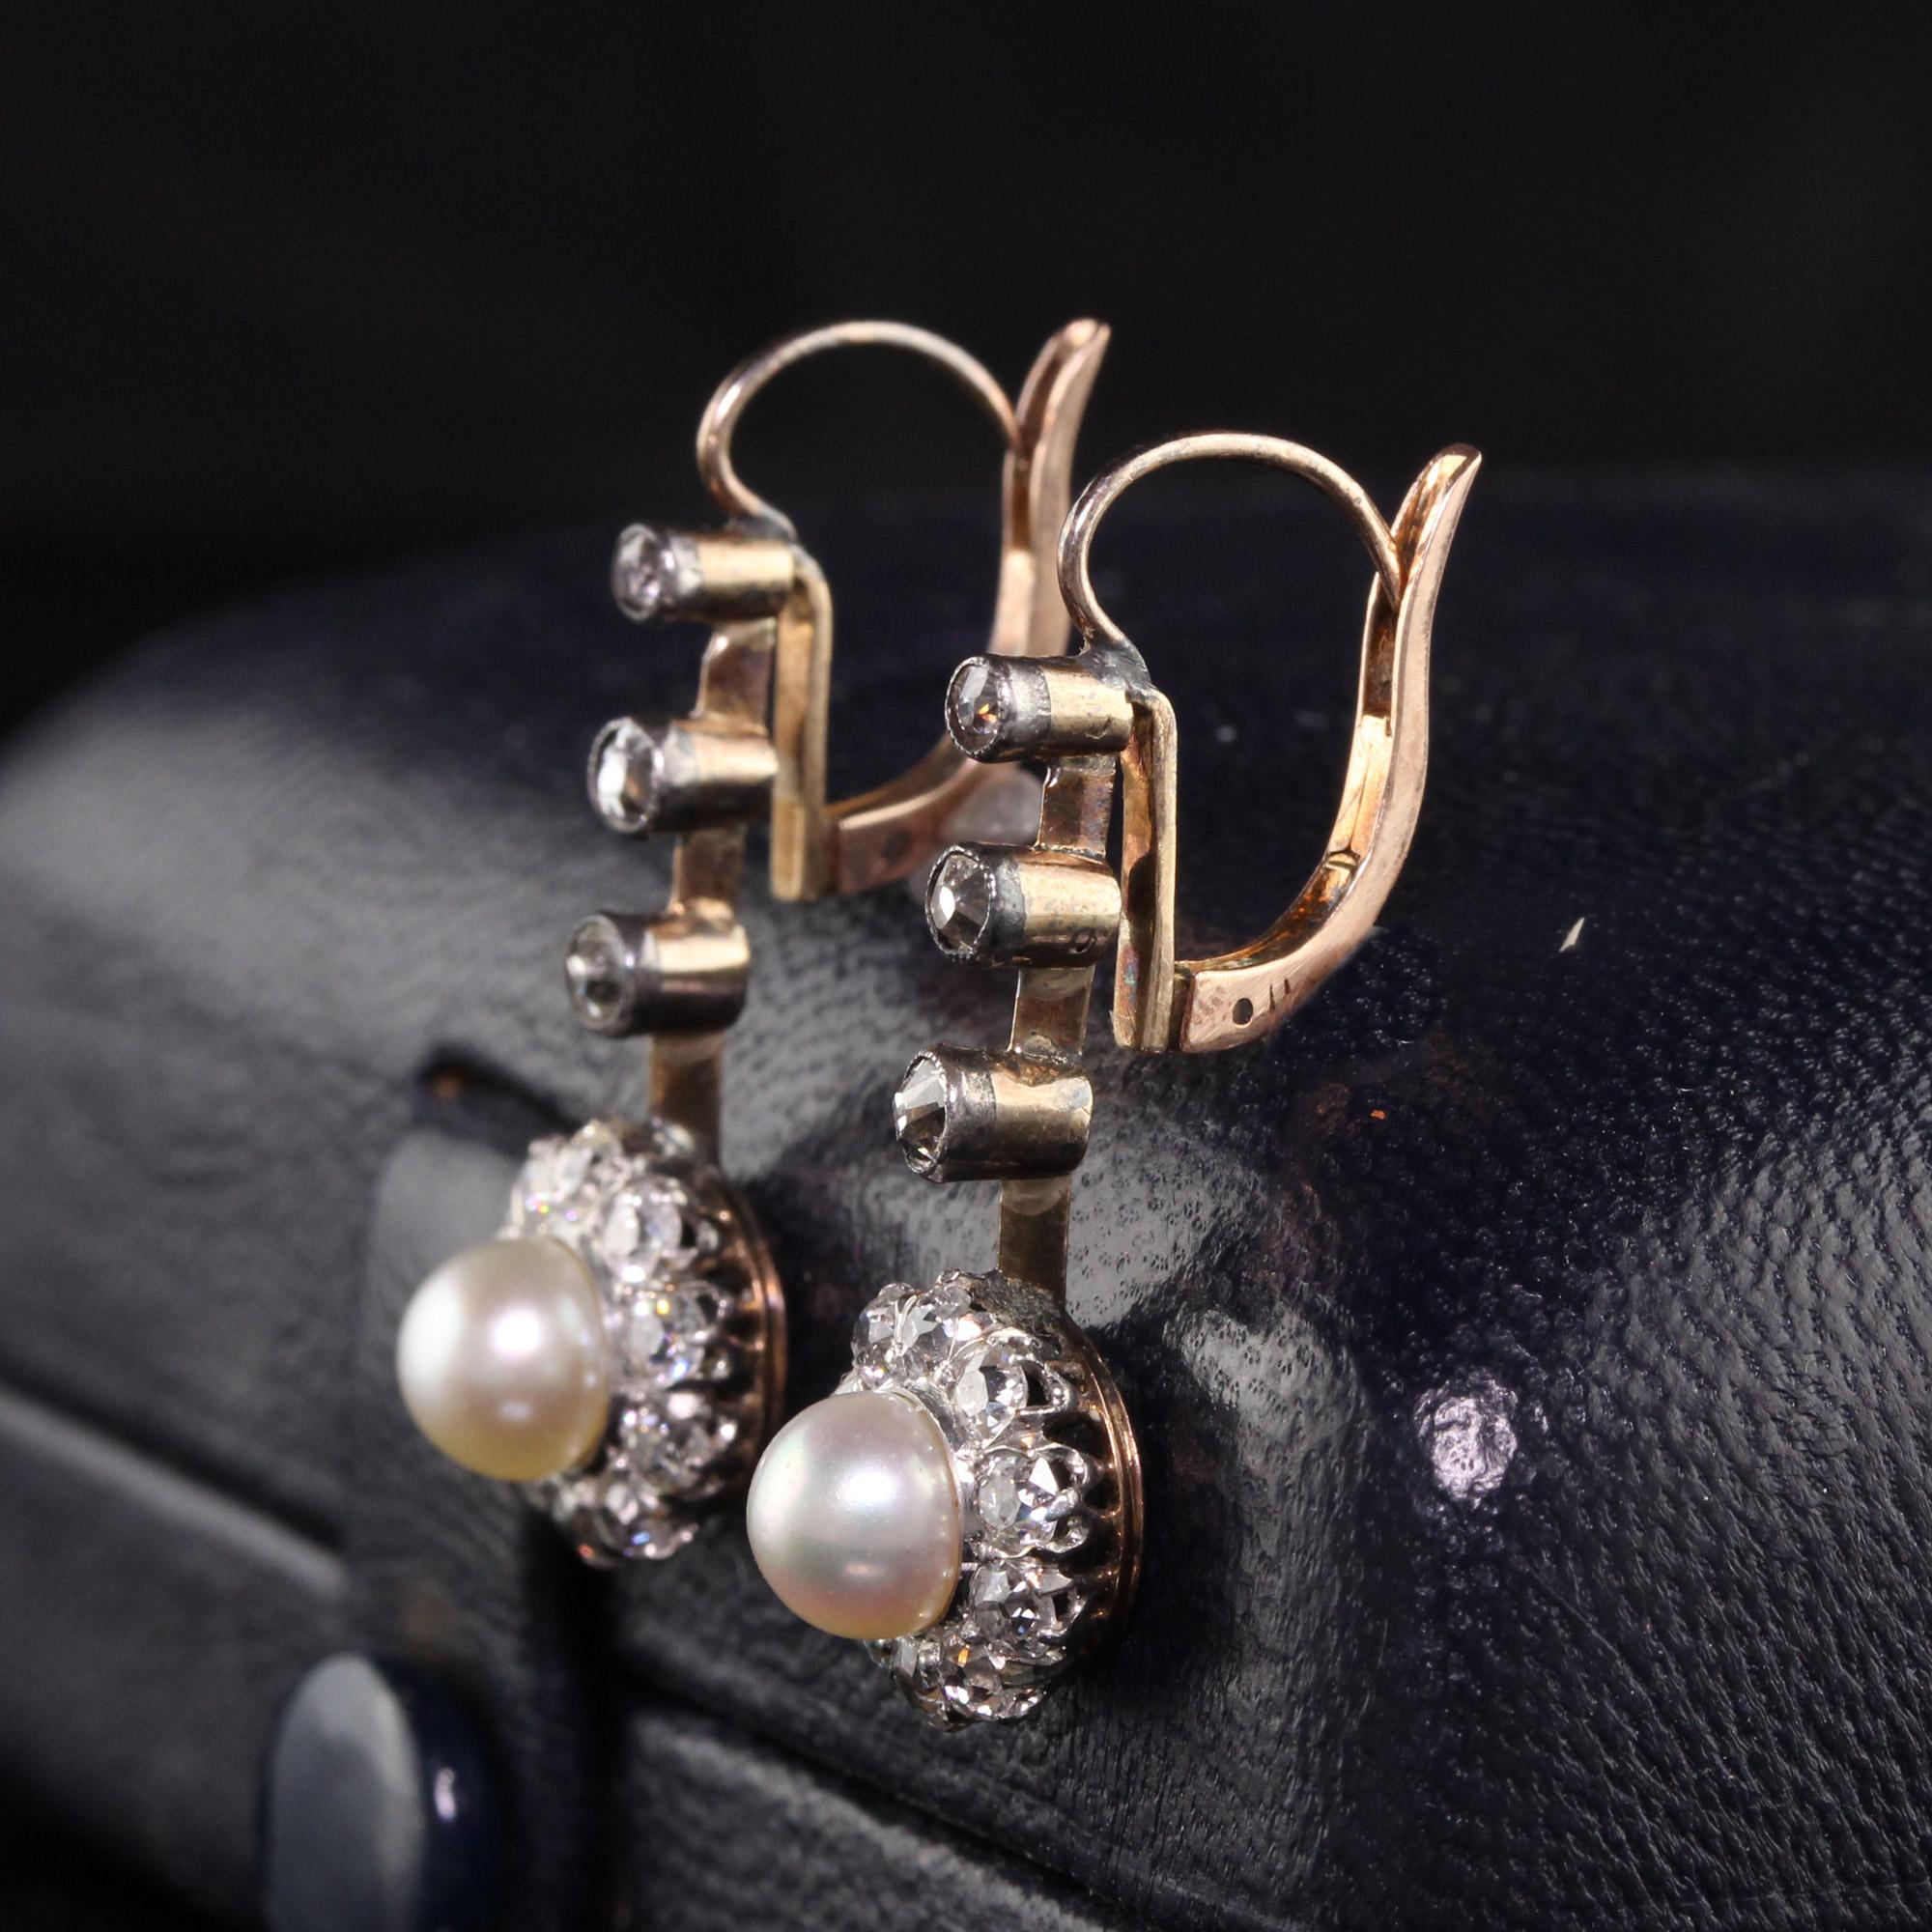 Gorgeous Antique Victorian 14K Rose Gold and Silver Top Old Mine Diamond and Pearl Earrings. This gorgeous earrings have old mine cut diamonds and natural pearls in the center of each drop. They are in great condition and ready to wear!

Item